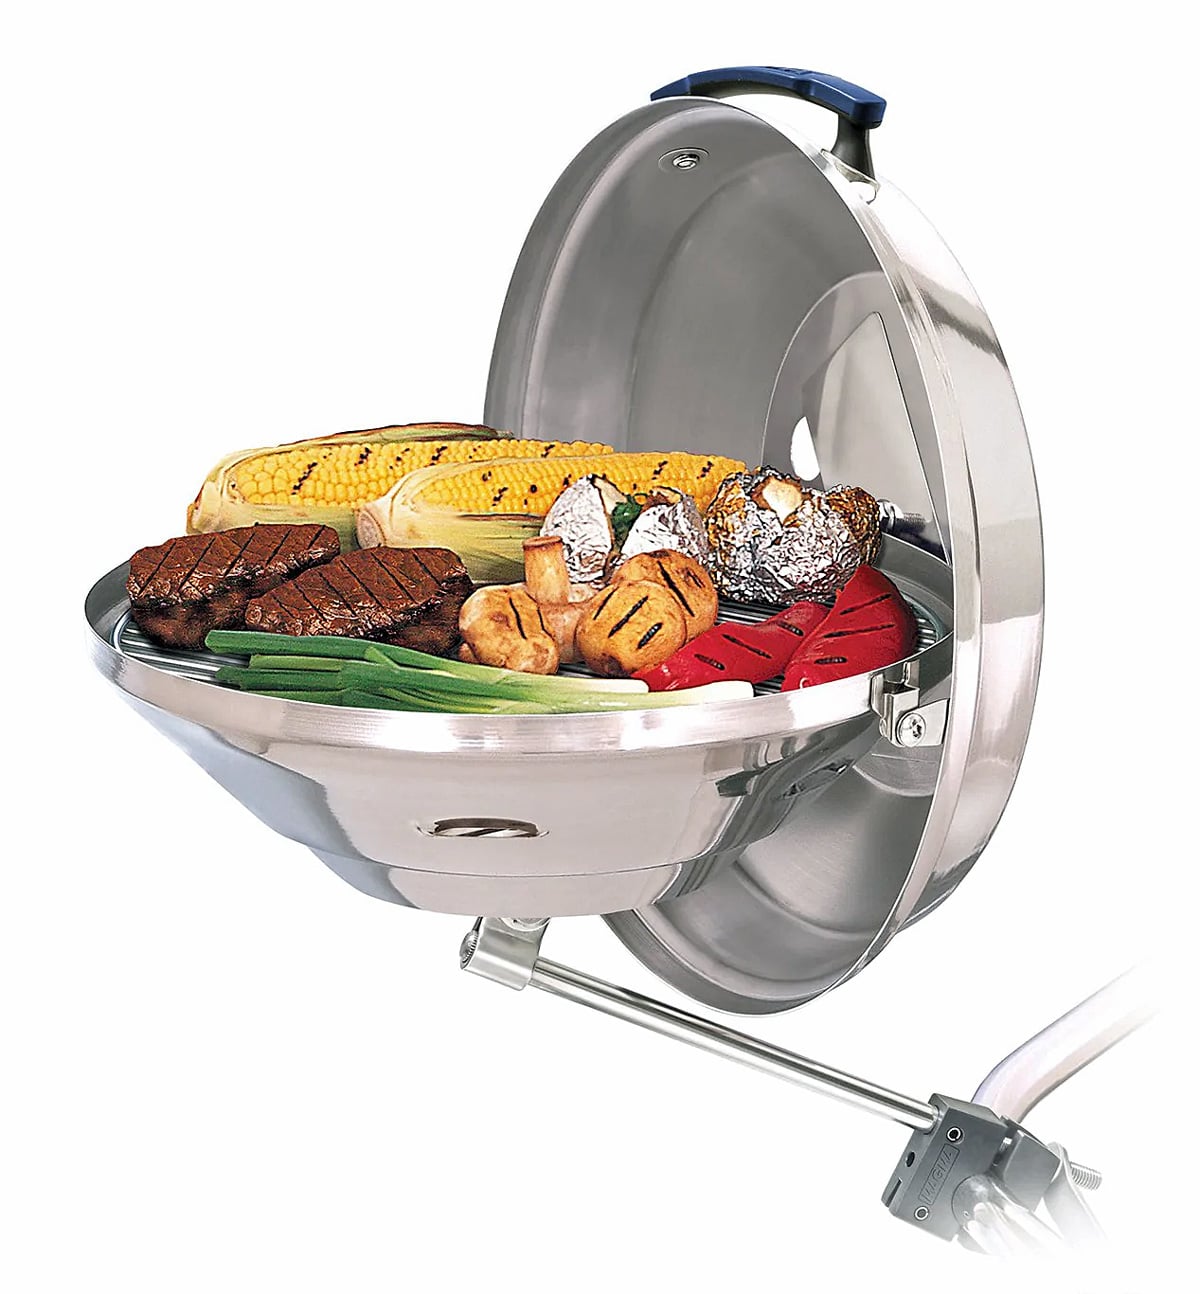 Religiøs kost Antologi Magma Party Size Marine Kettle Gas Grill Reviewed And Rated